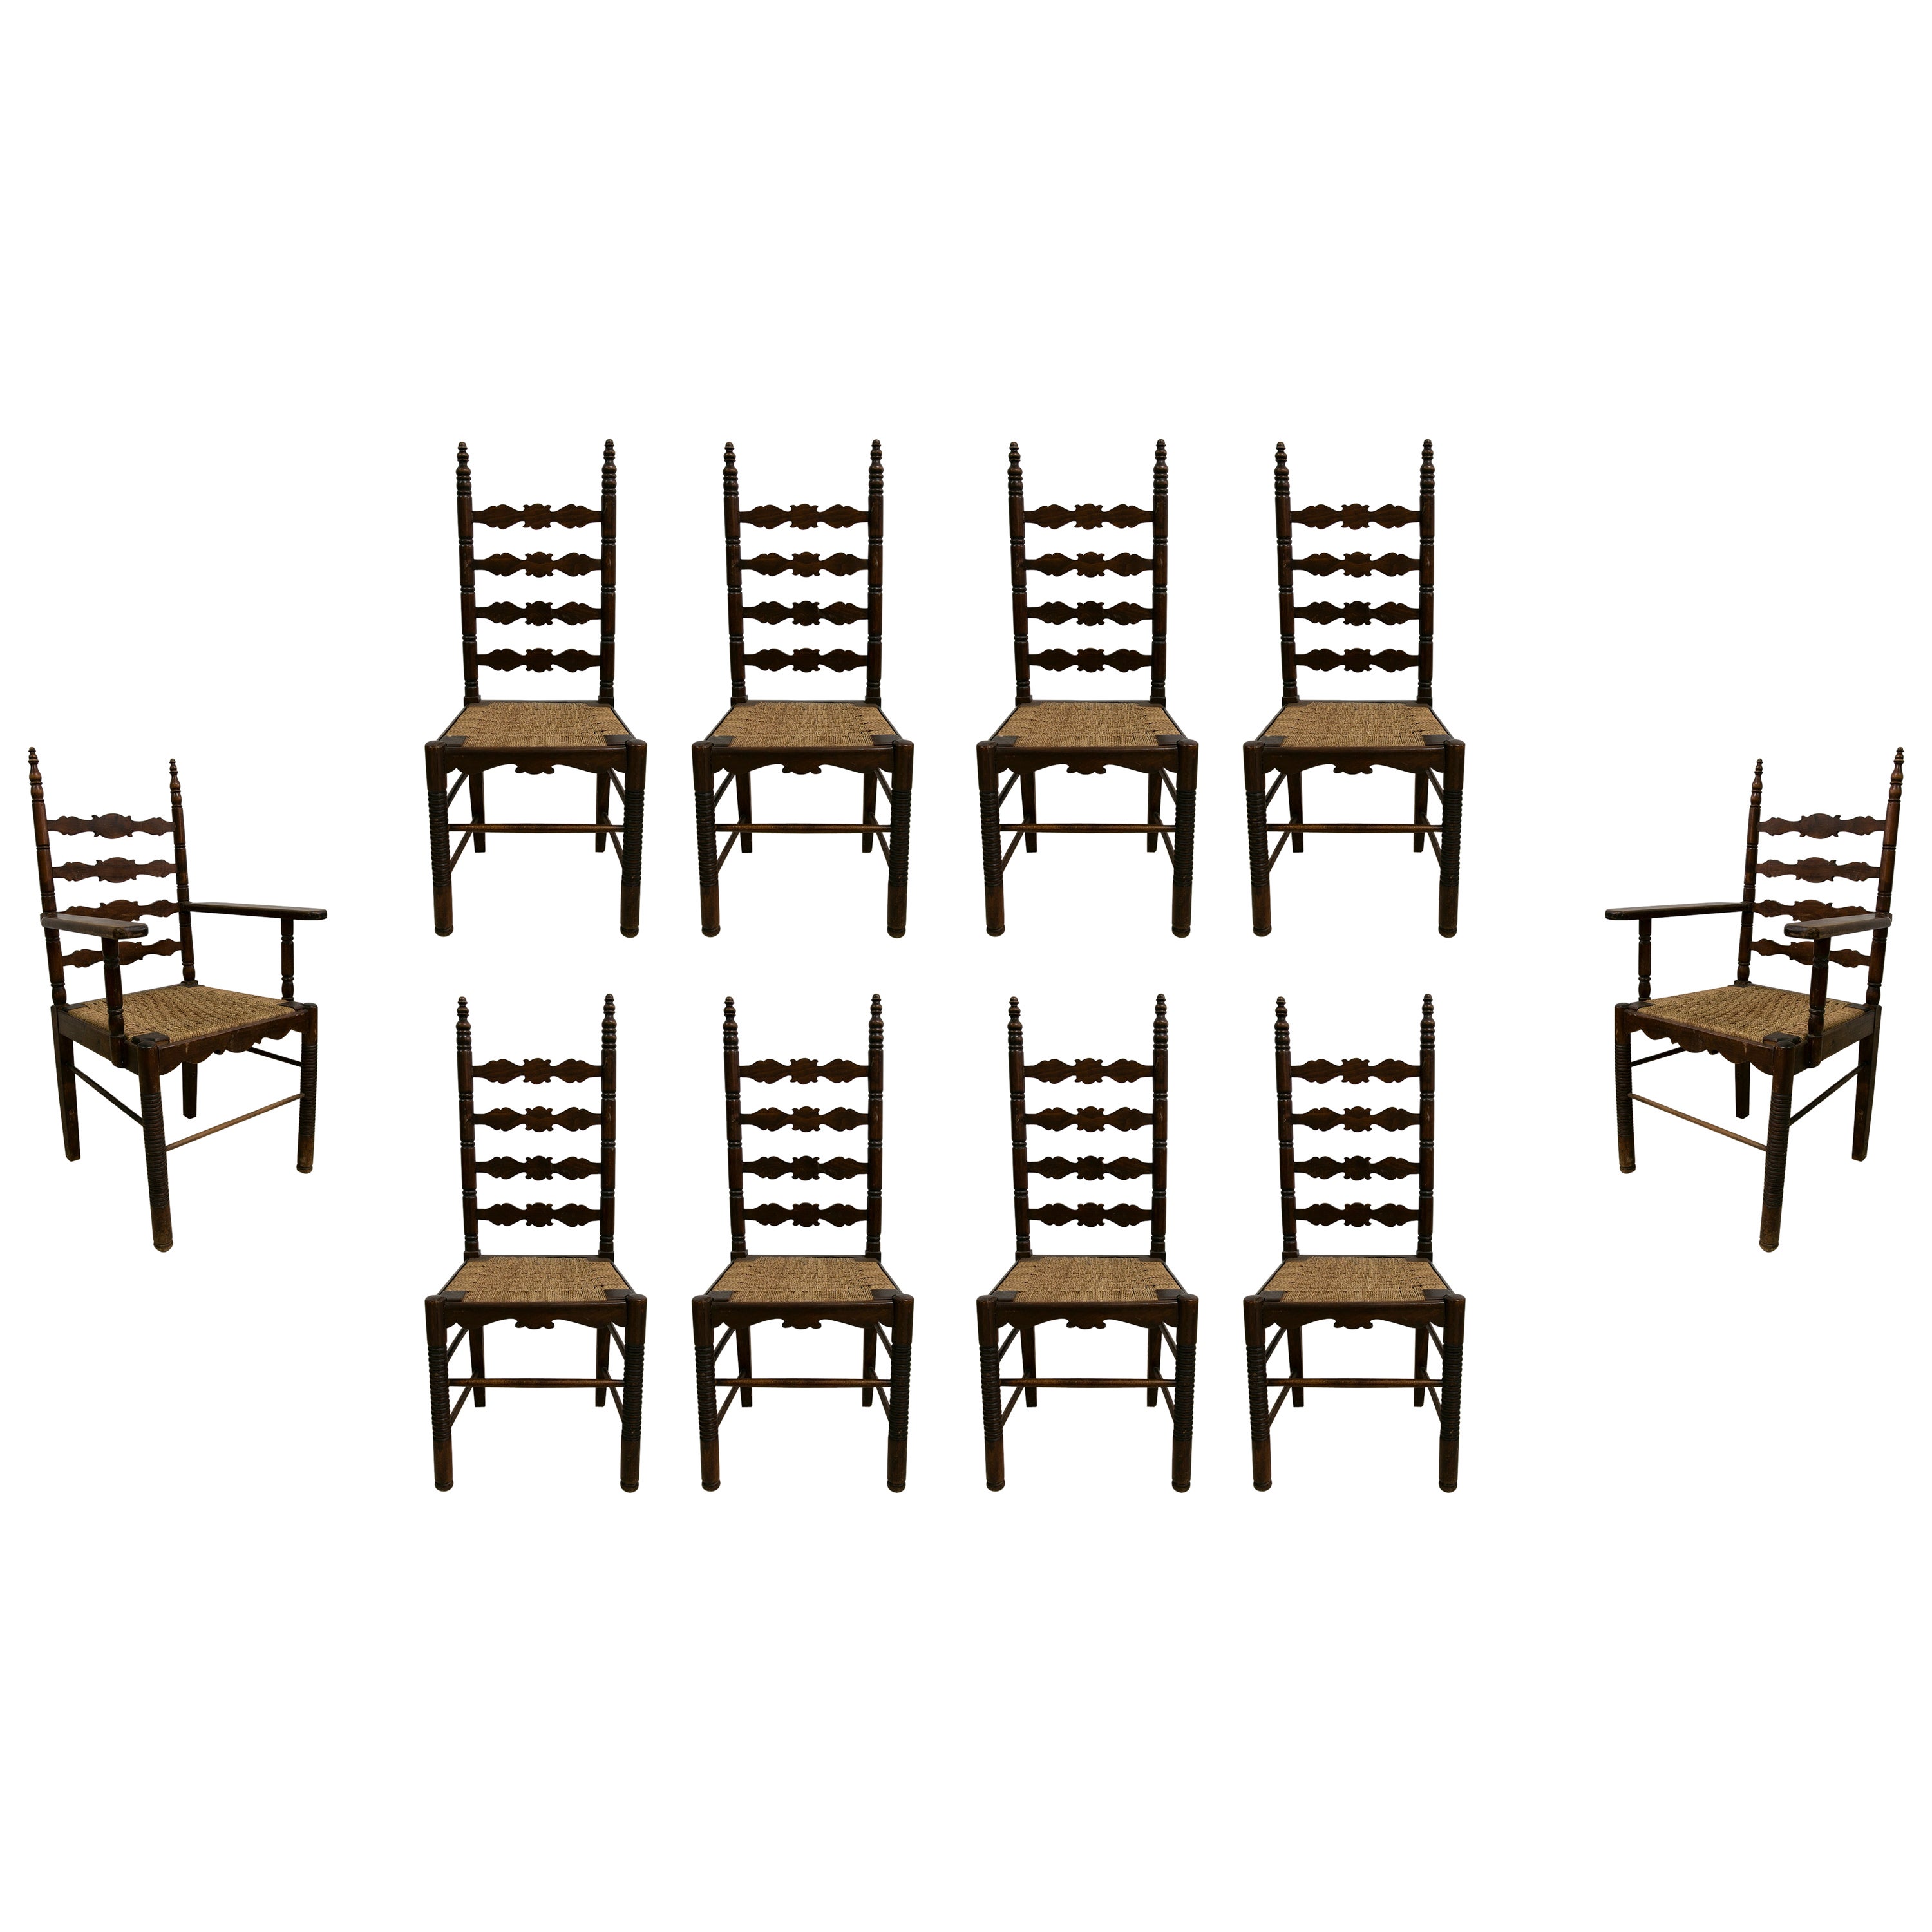 1930s Spanish Andalusian Flamenco Set of 8-Chairs & 2-Armchairs w/ Bulrush Seats